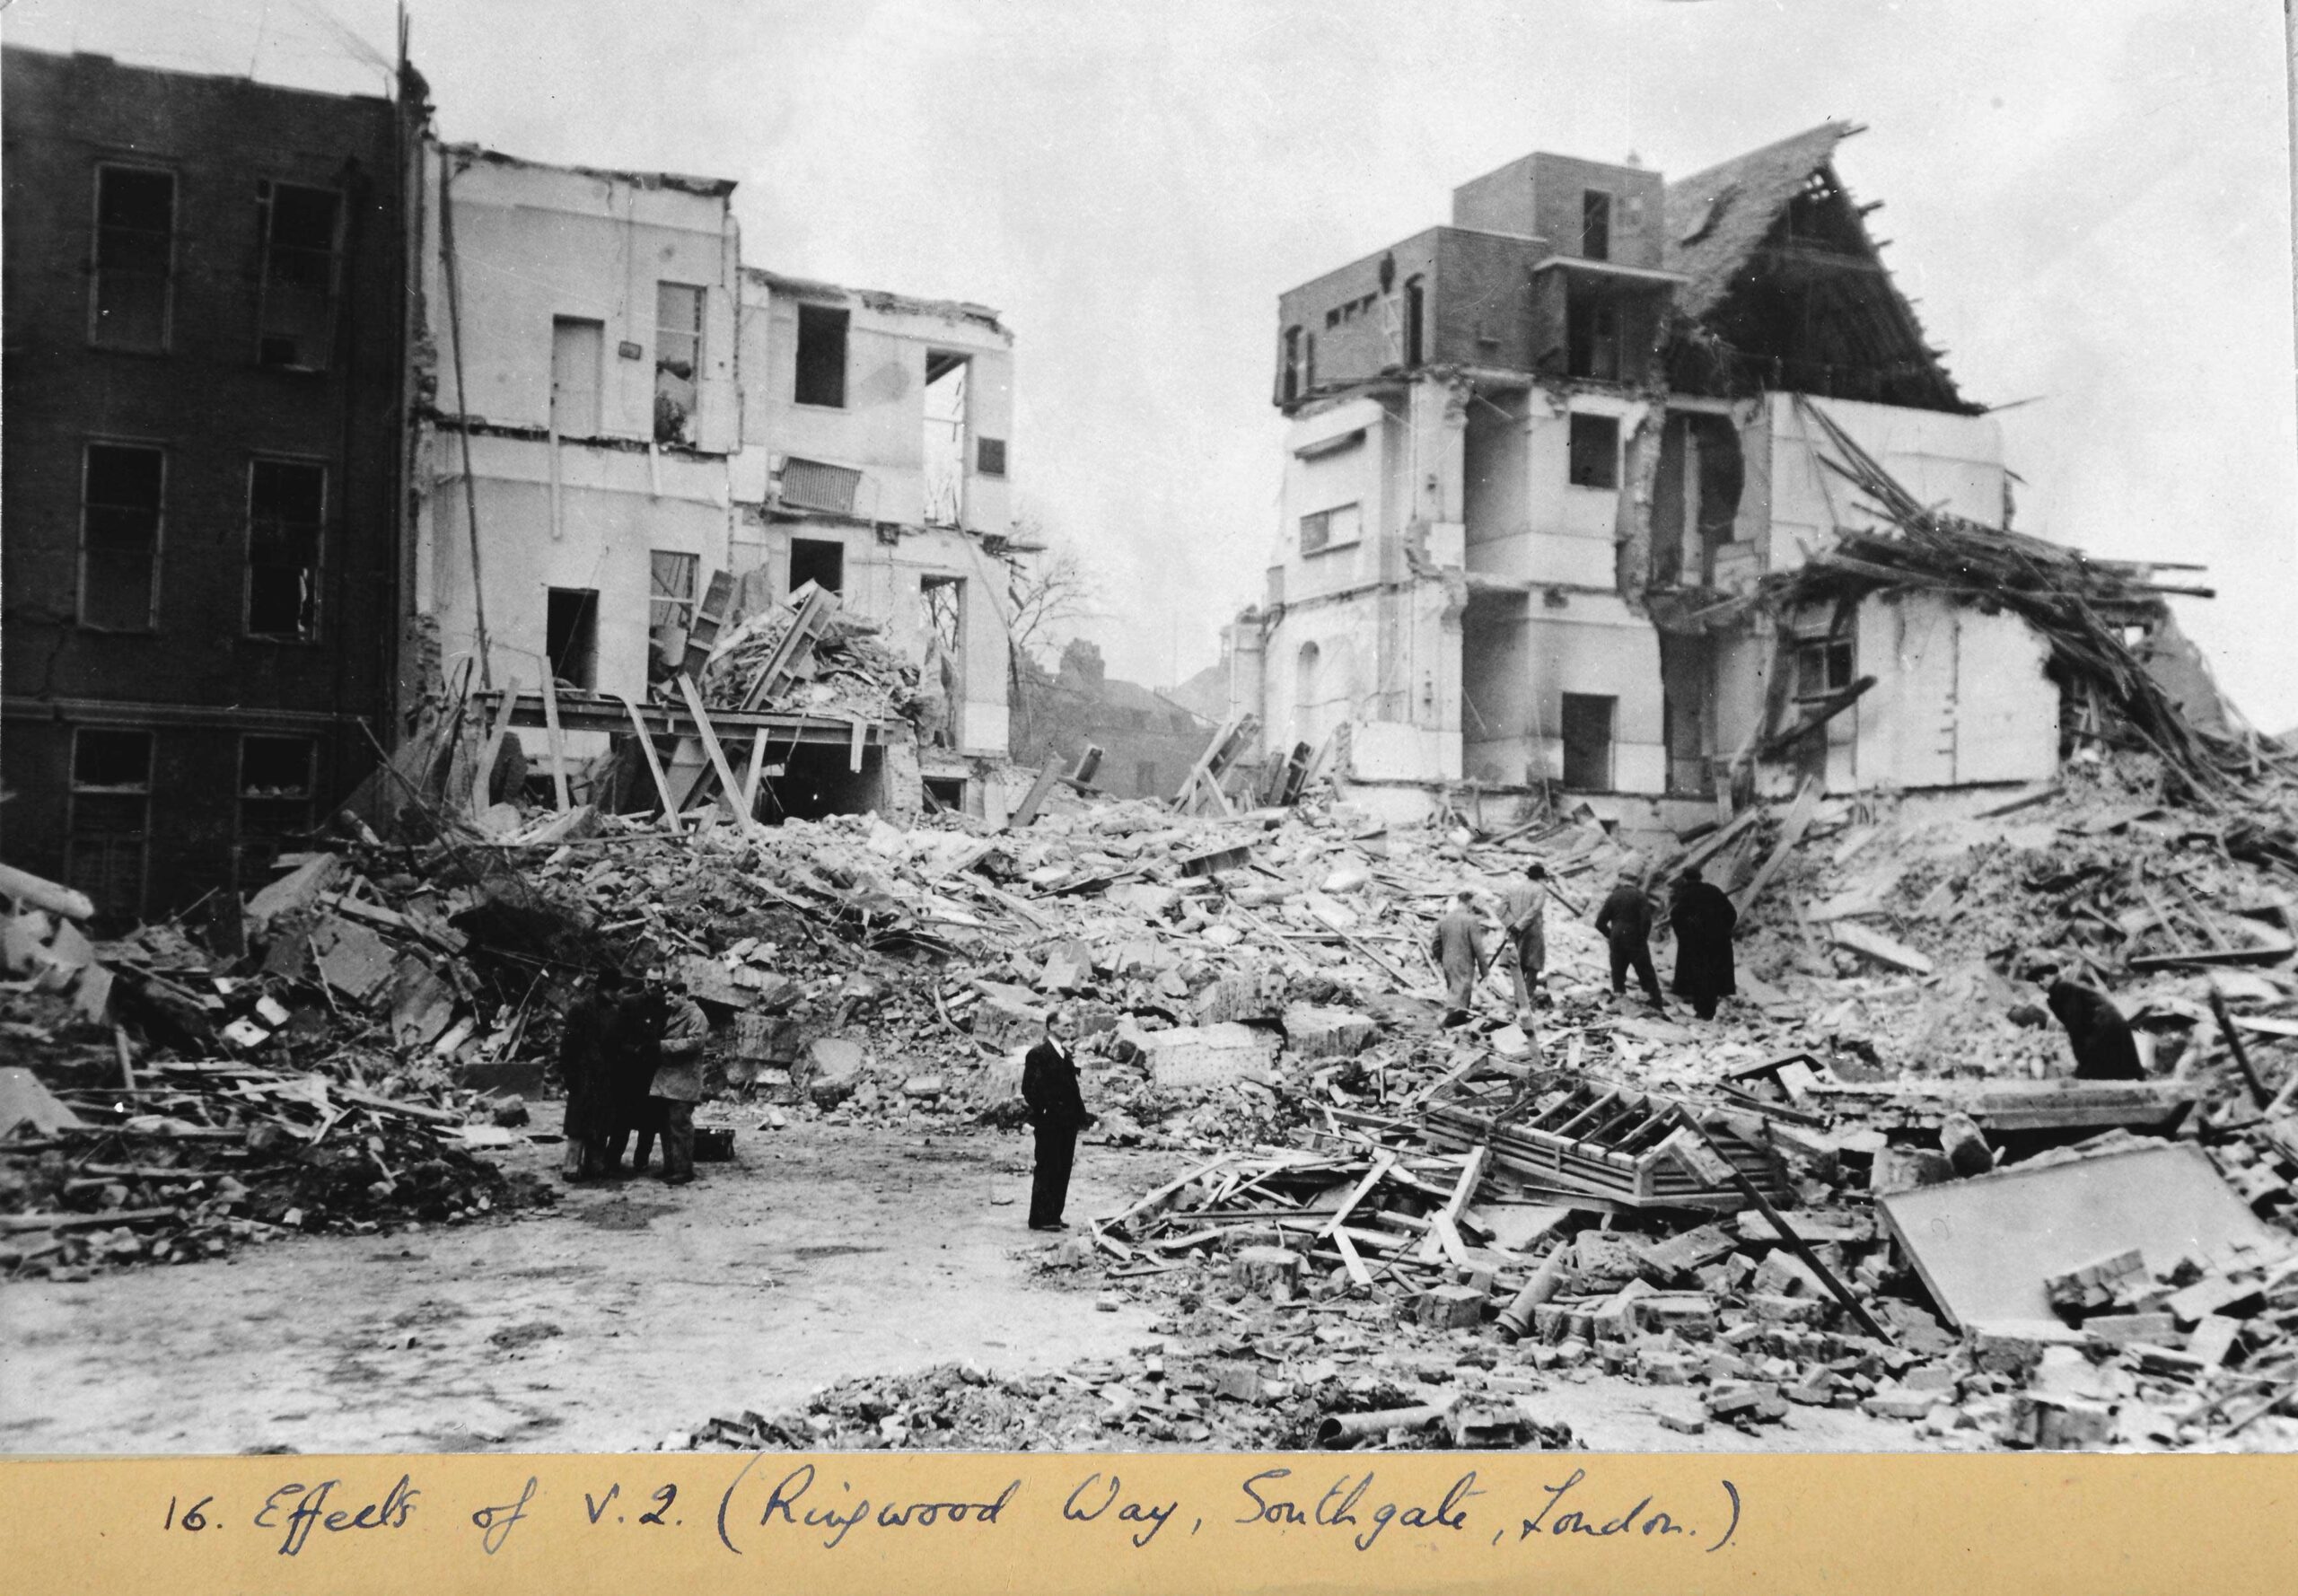 Monochrome photograph of a suited man standing in the middle of a city street reduced to rubble. Only a few houses are somewhat intact. Two groups of people close by stand talking or picking through the rubble.